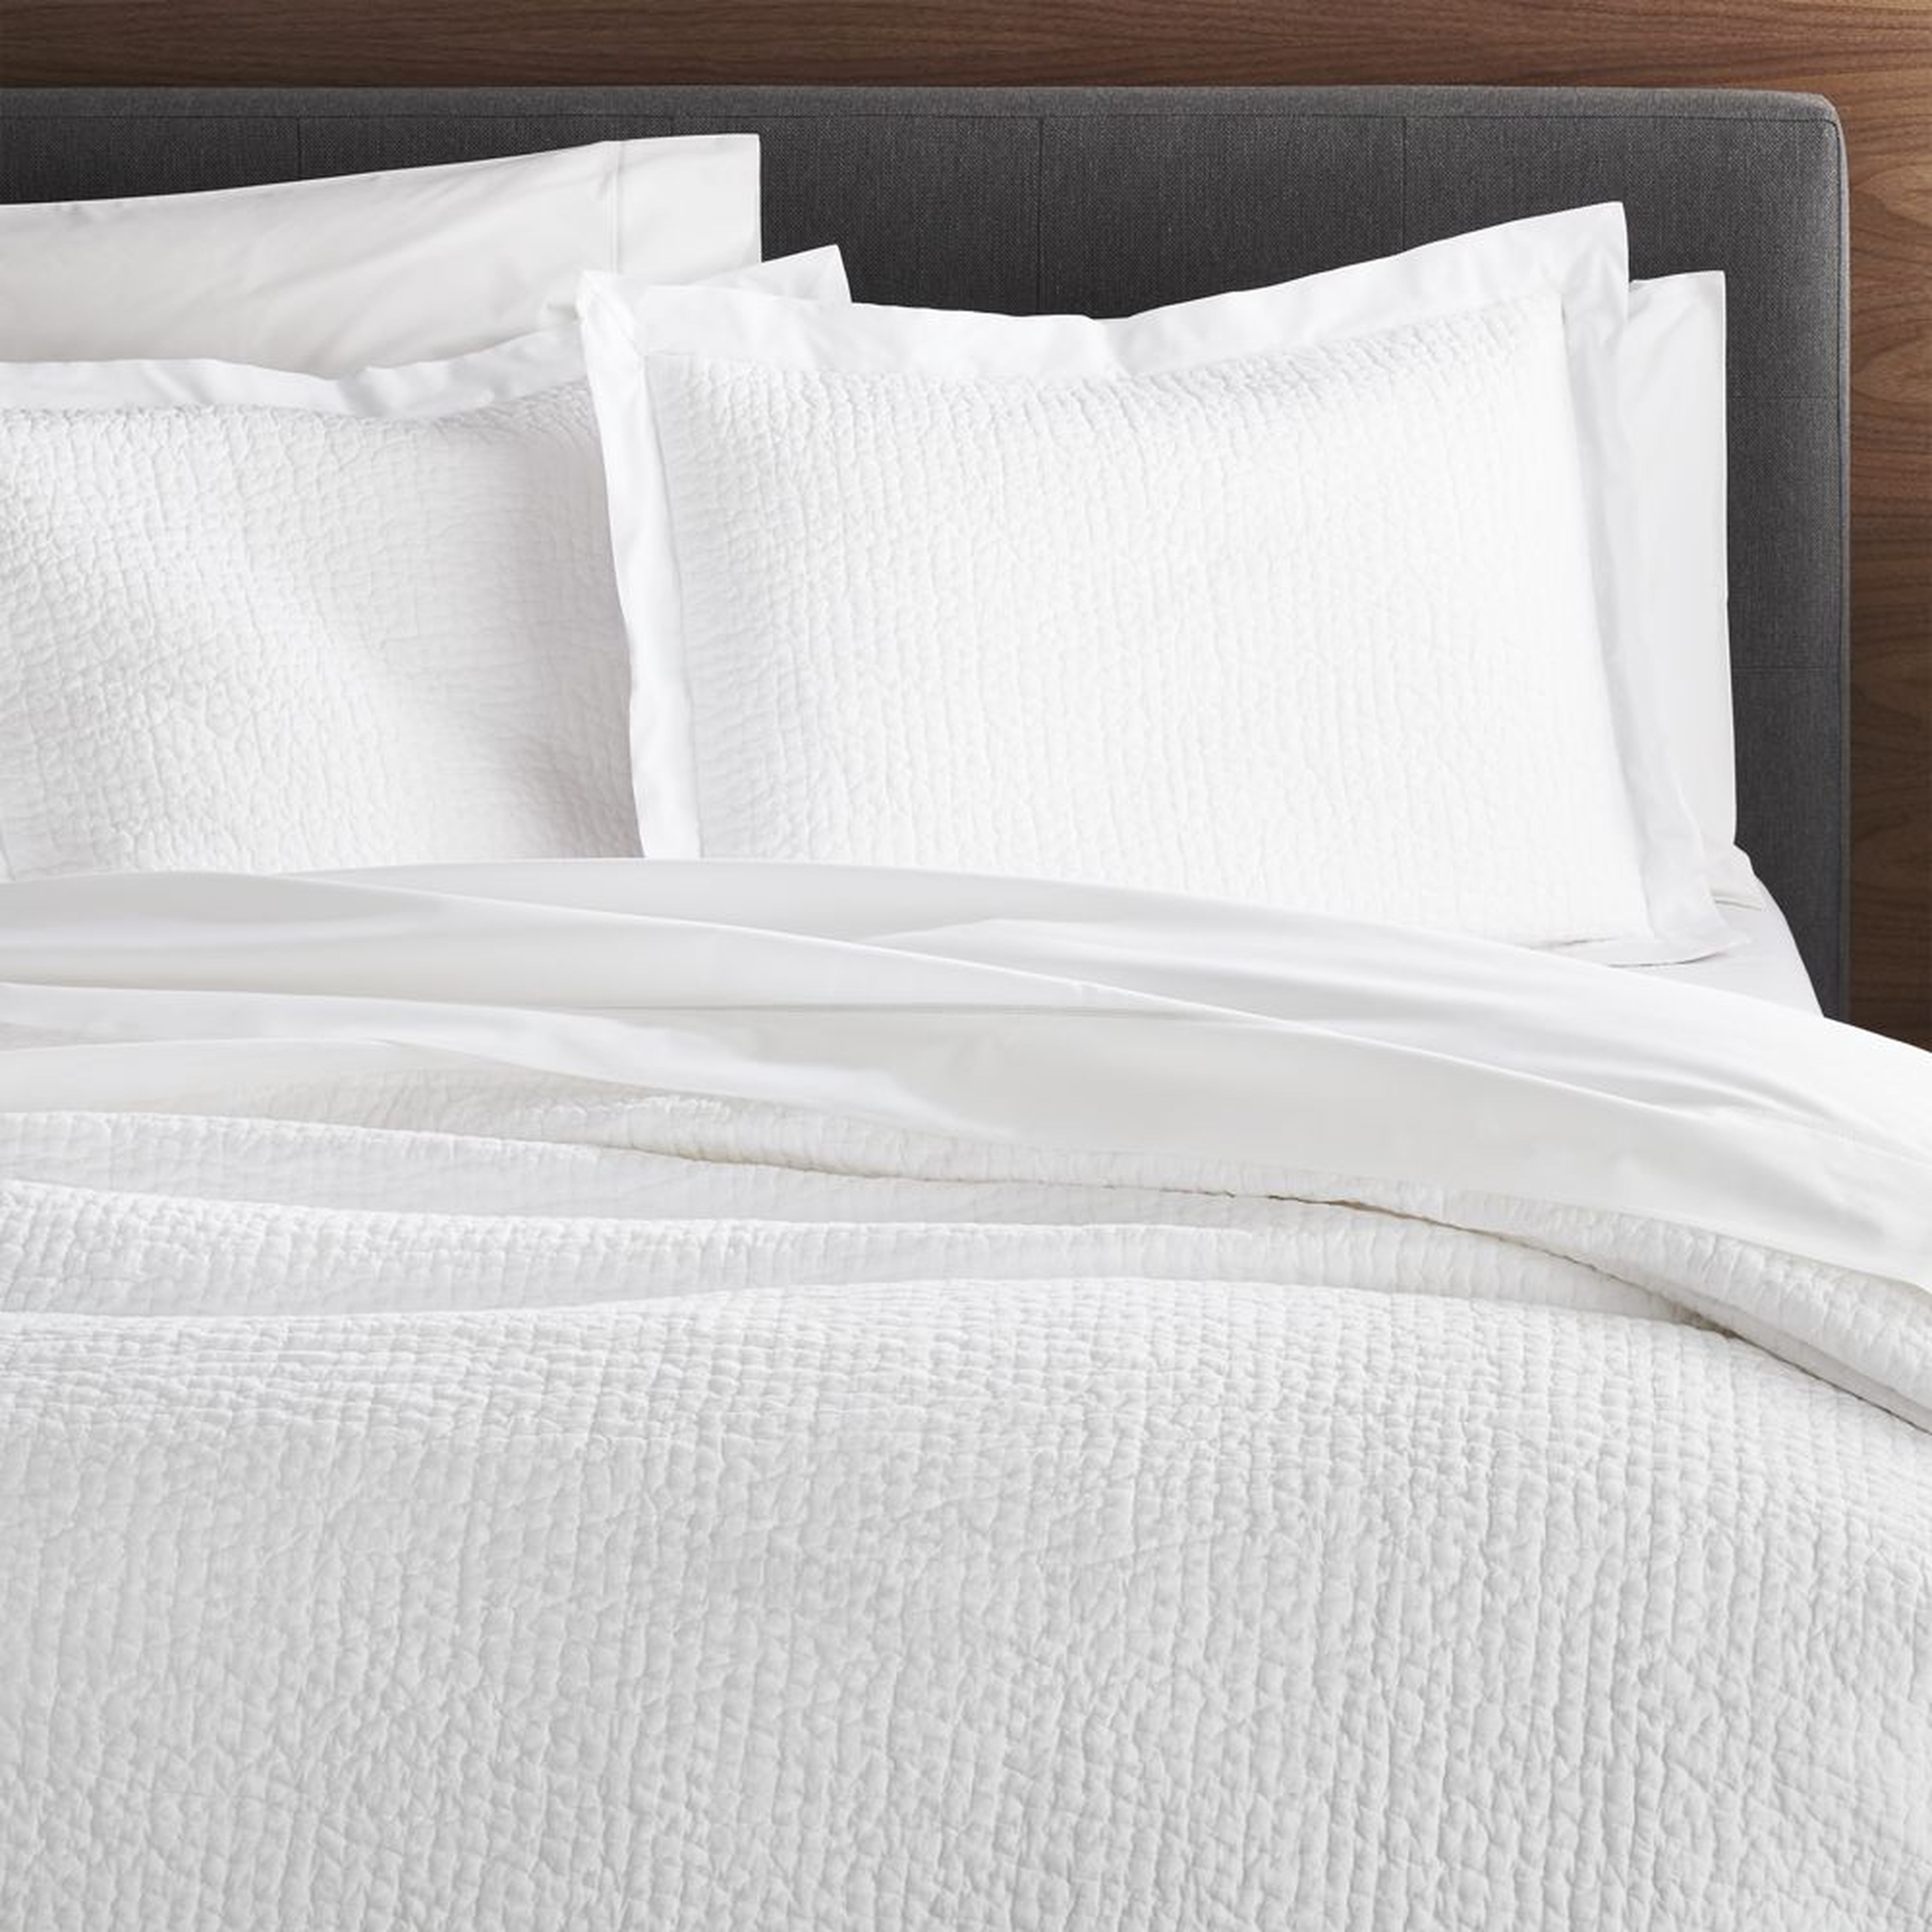 Celeste White Cotton Solid Quilt Full/Queen - Crate and Barrel